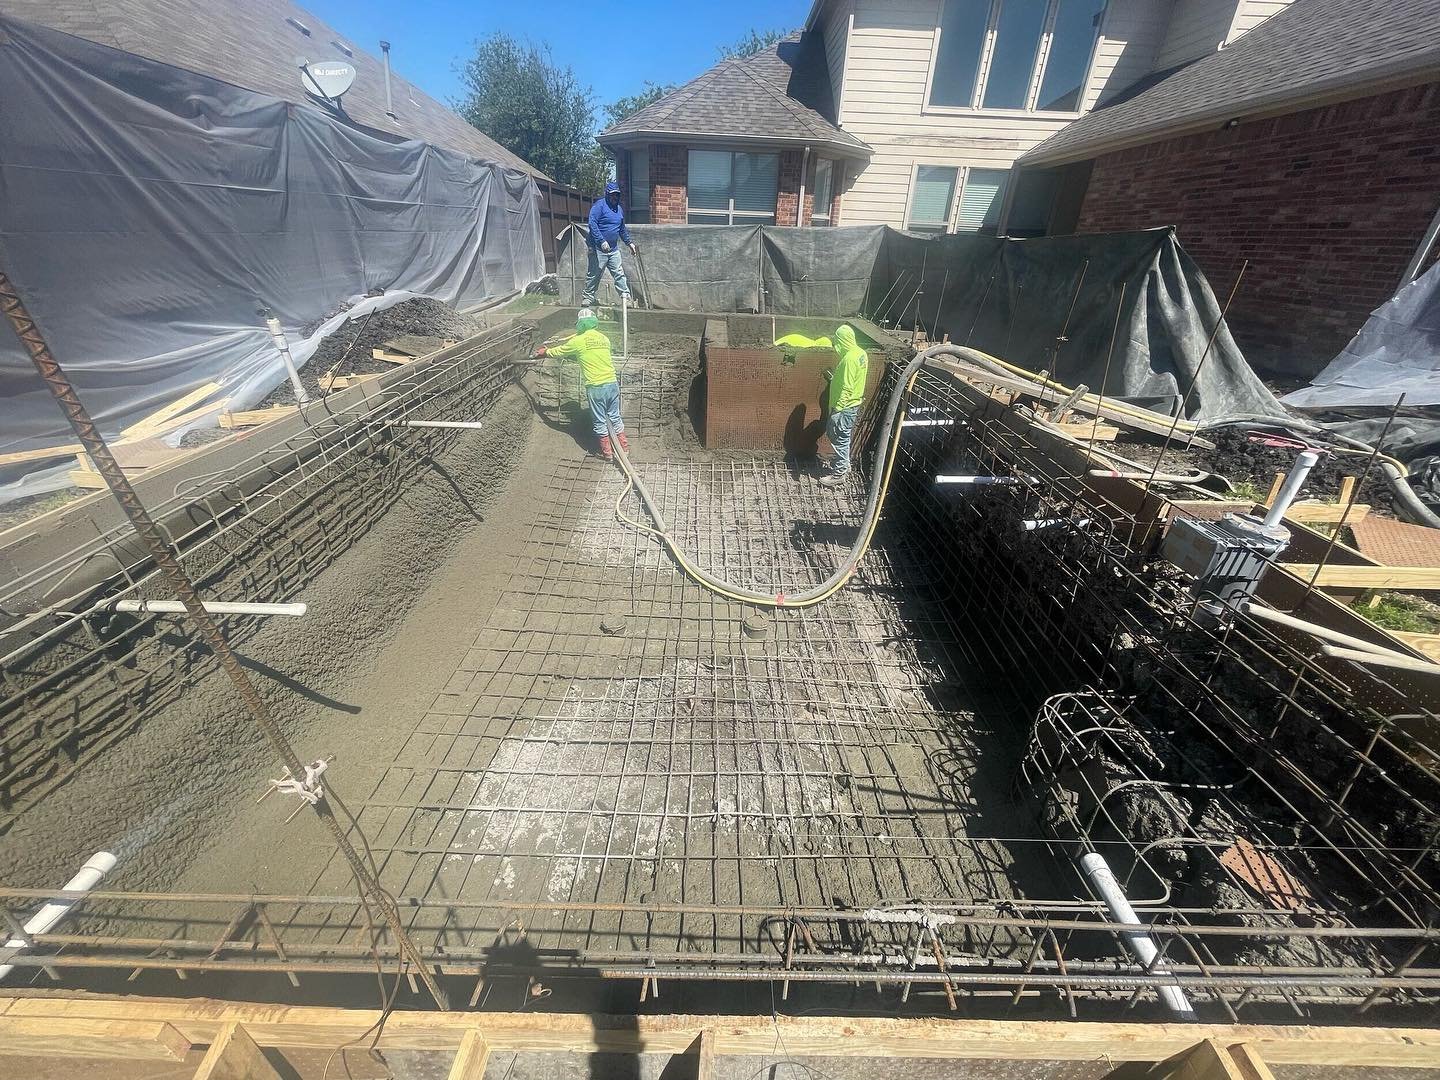 Finishing up the shotcrete and then on to tile &amp; coping! 👏🏼

#FoleyPools #pool #outdoorliving #pooldesign #construction #outdoorliving #renovation #poolbuilder #excavator #excavation #gunitepool #poolconstruction #poolinspo #prospertx #friscotx